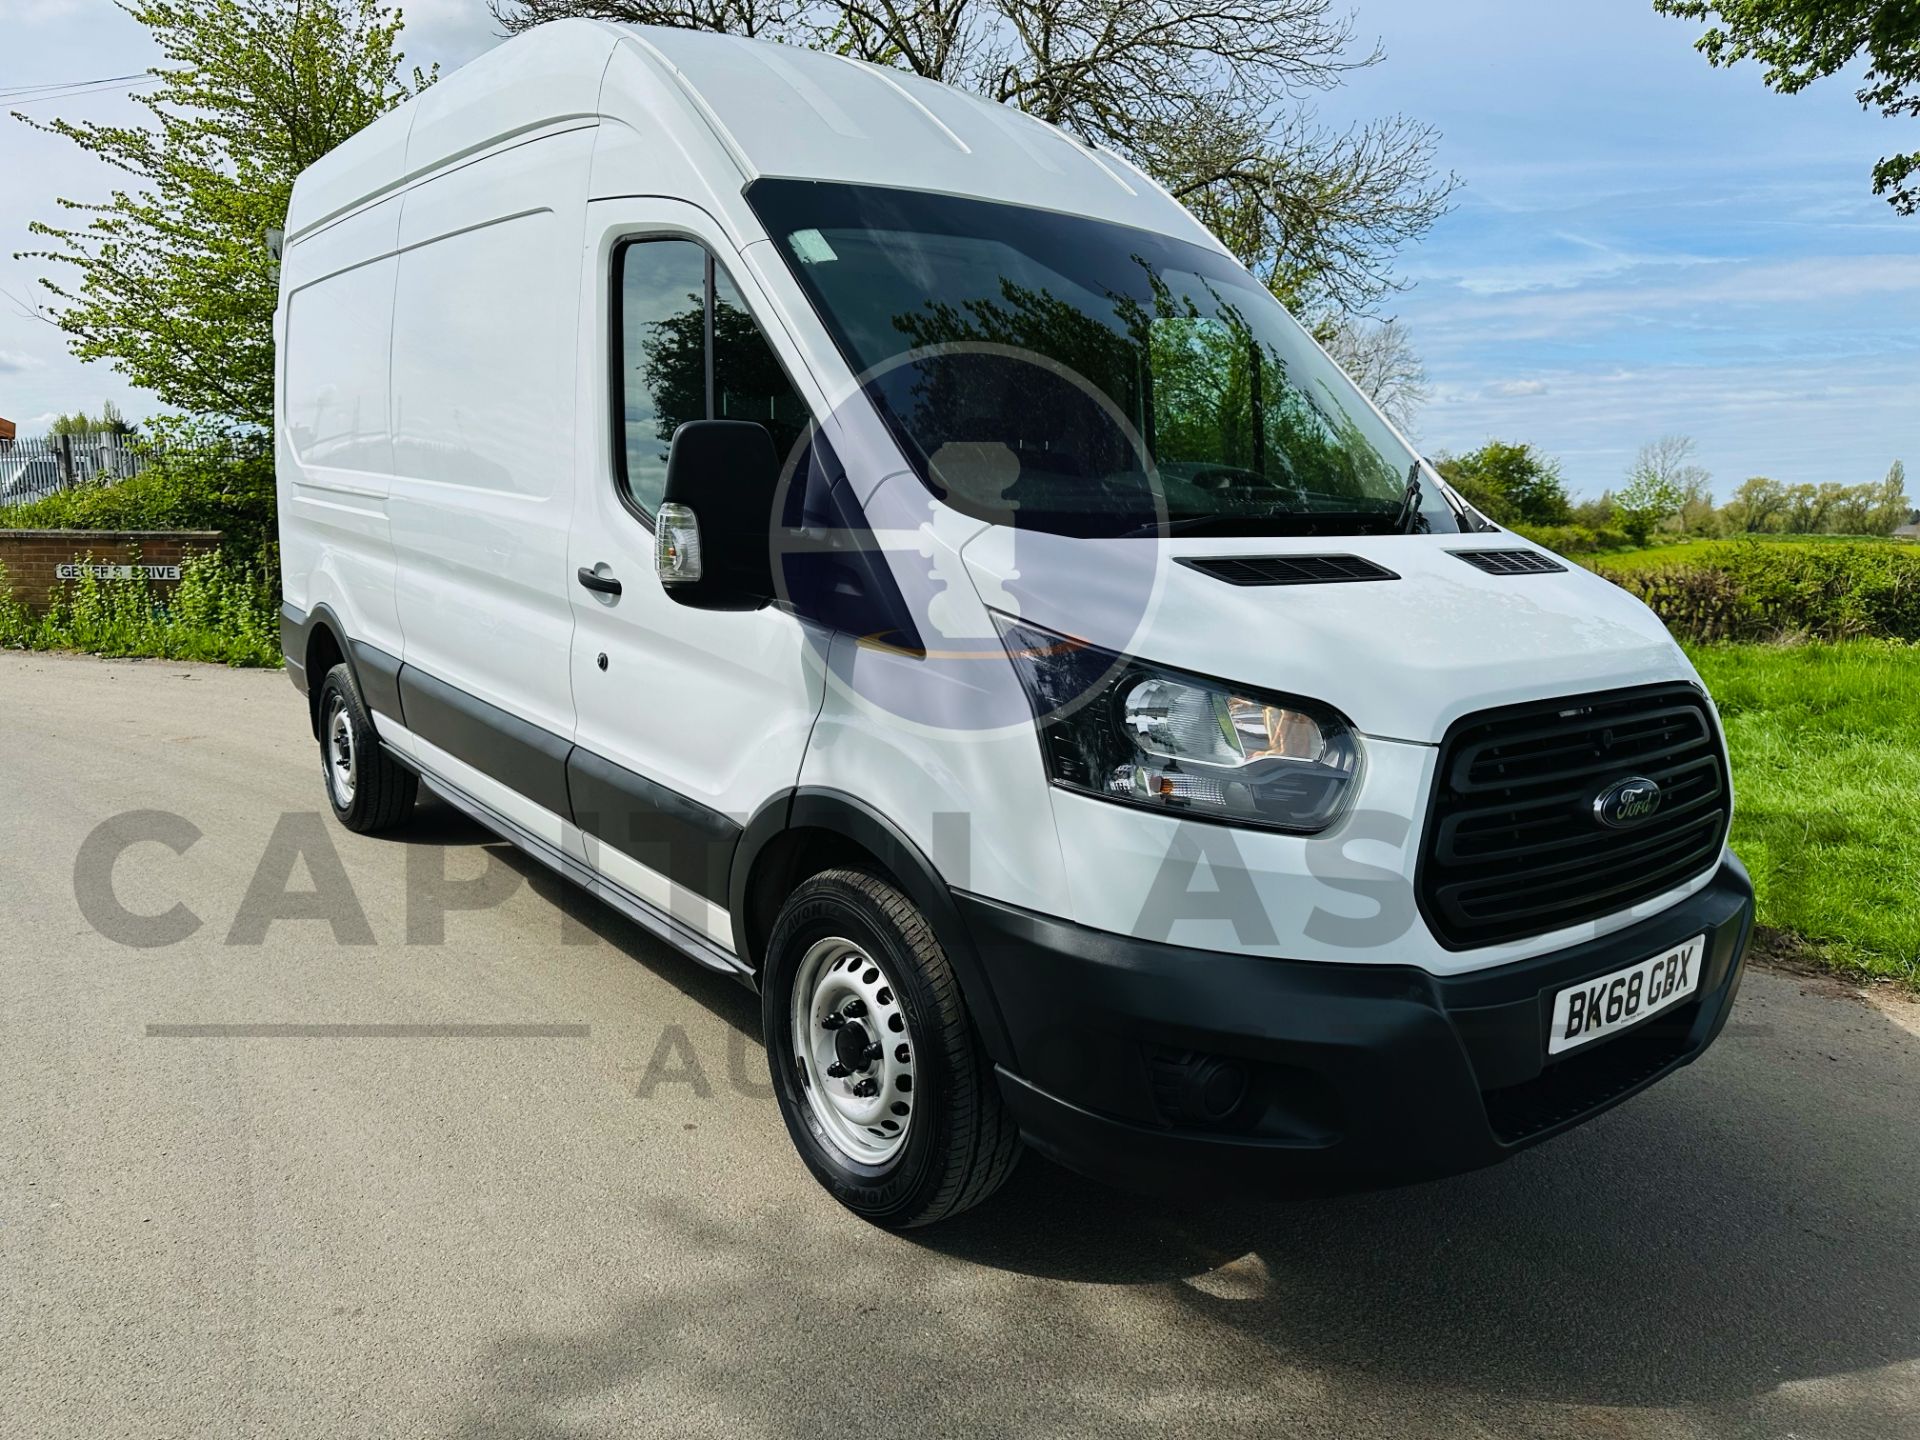 FORD TRANSIT 350 2.0 TDCI *ECOBLUE EDITION* LWB HIGH TOP - EURO 6 - 2019 MODEL - 1 OWNER - LOOK!!! - Image 2 of 32